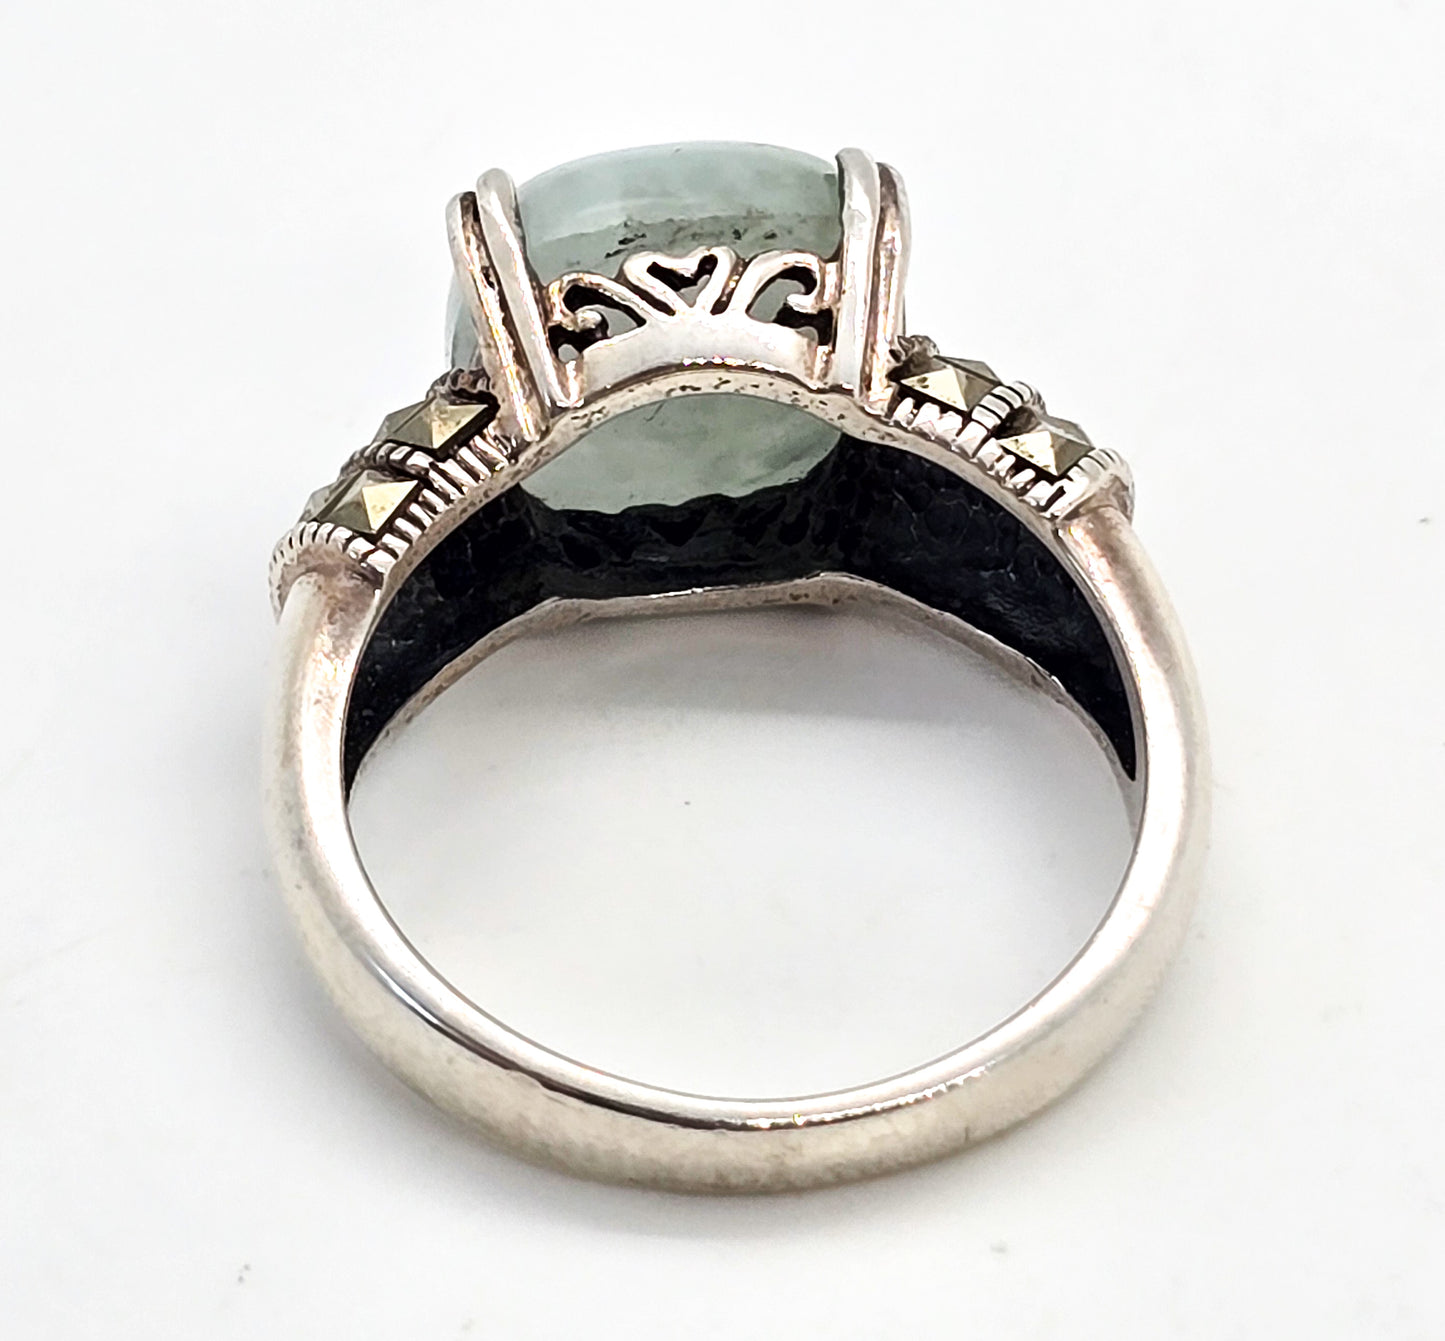 Milky Aquamarine and marcasite  heart setting vintage sterling silver ring size 10